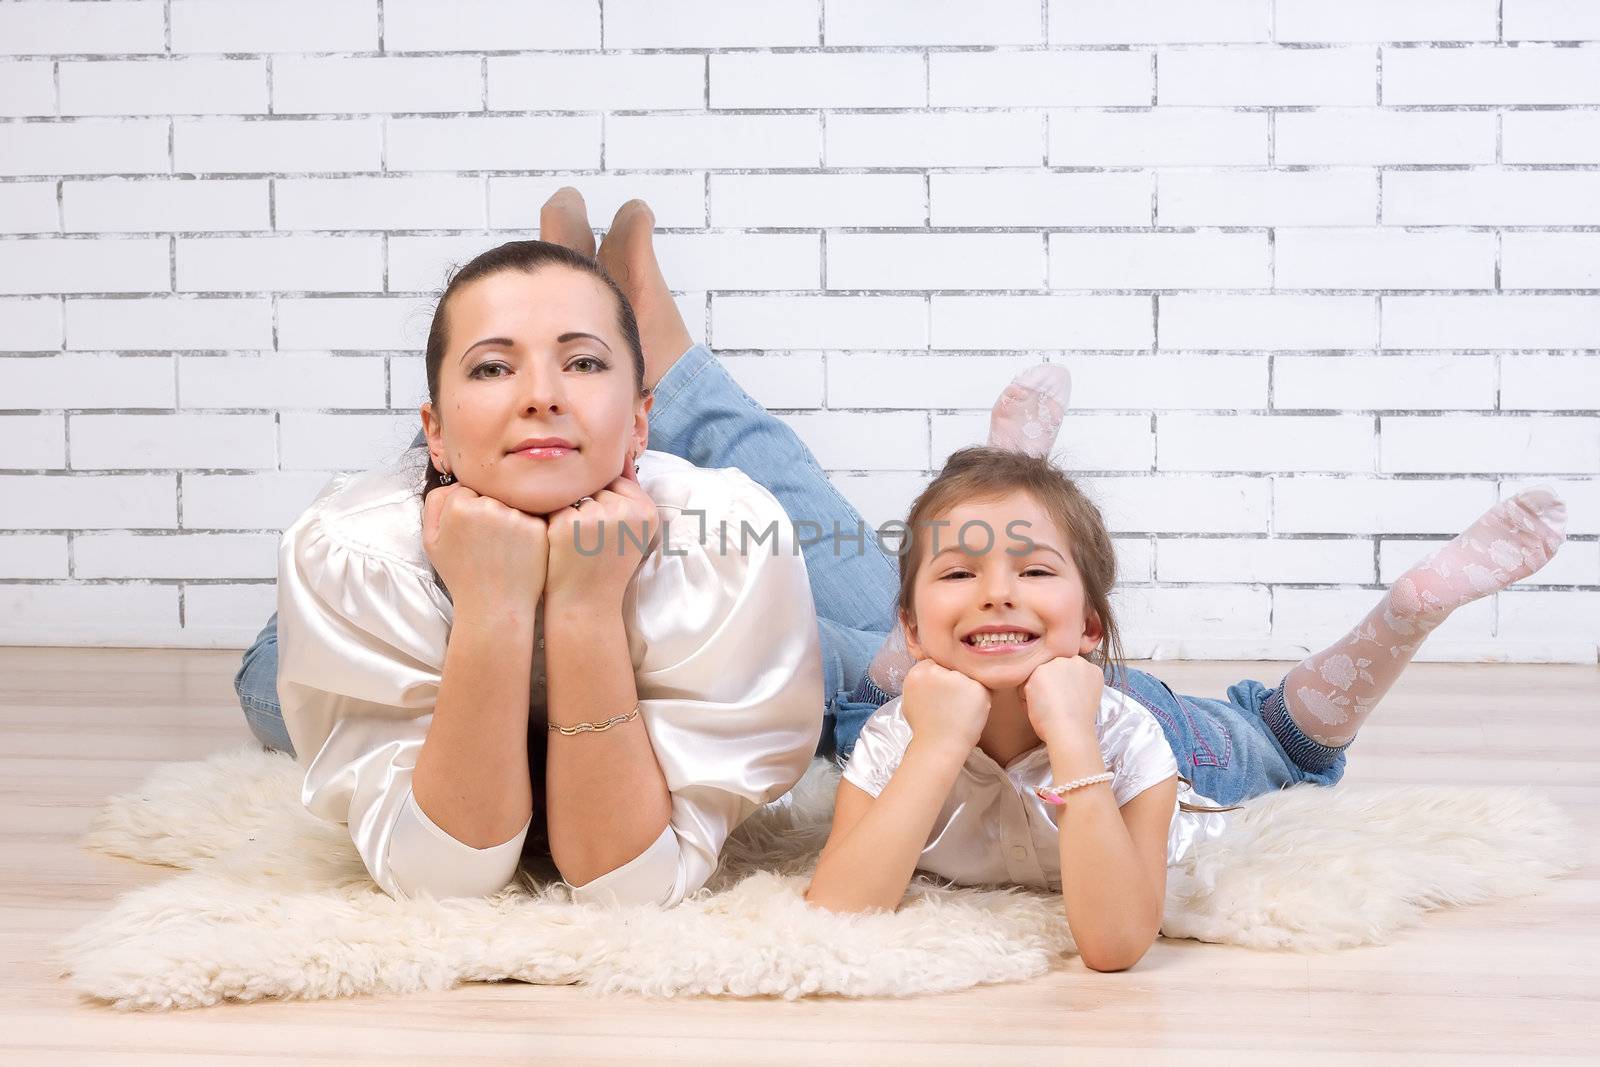 Mom with 5 year old daughter in a similar dress lying on the floor near the brick wall